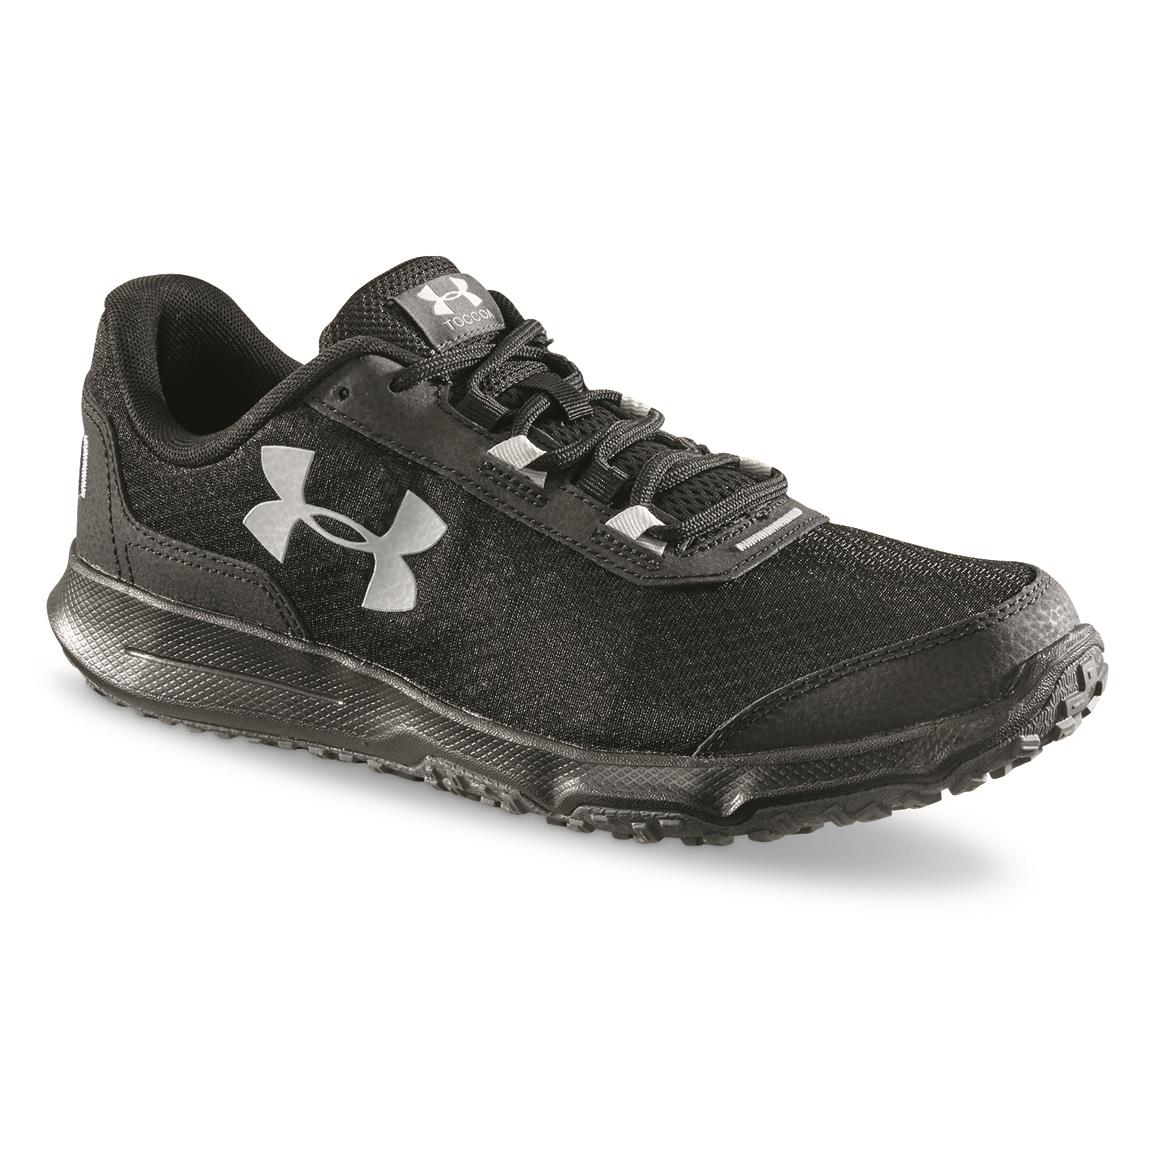 Under Armour Men's Toccoa Running Shoes 